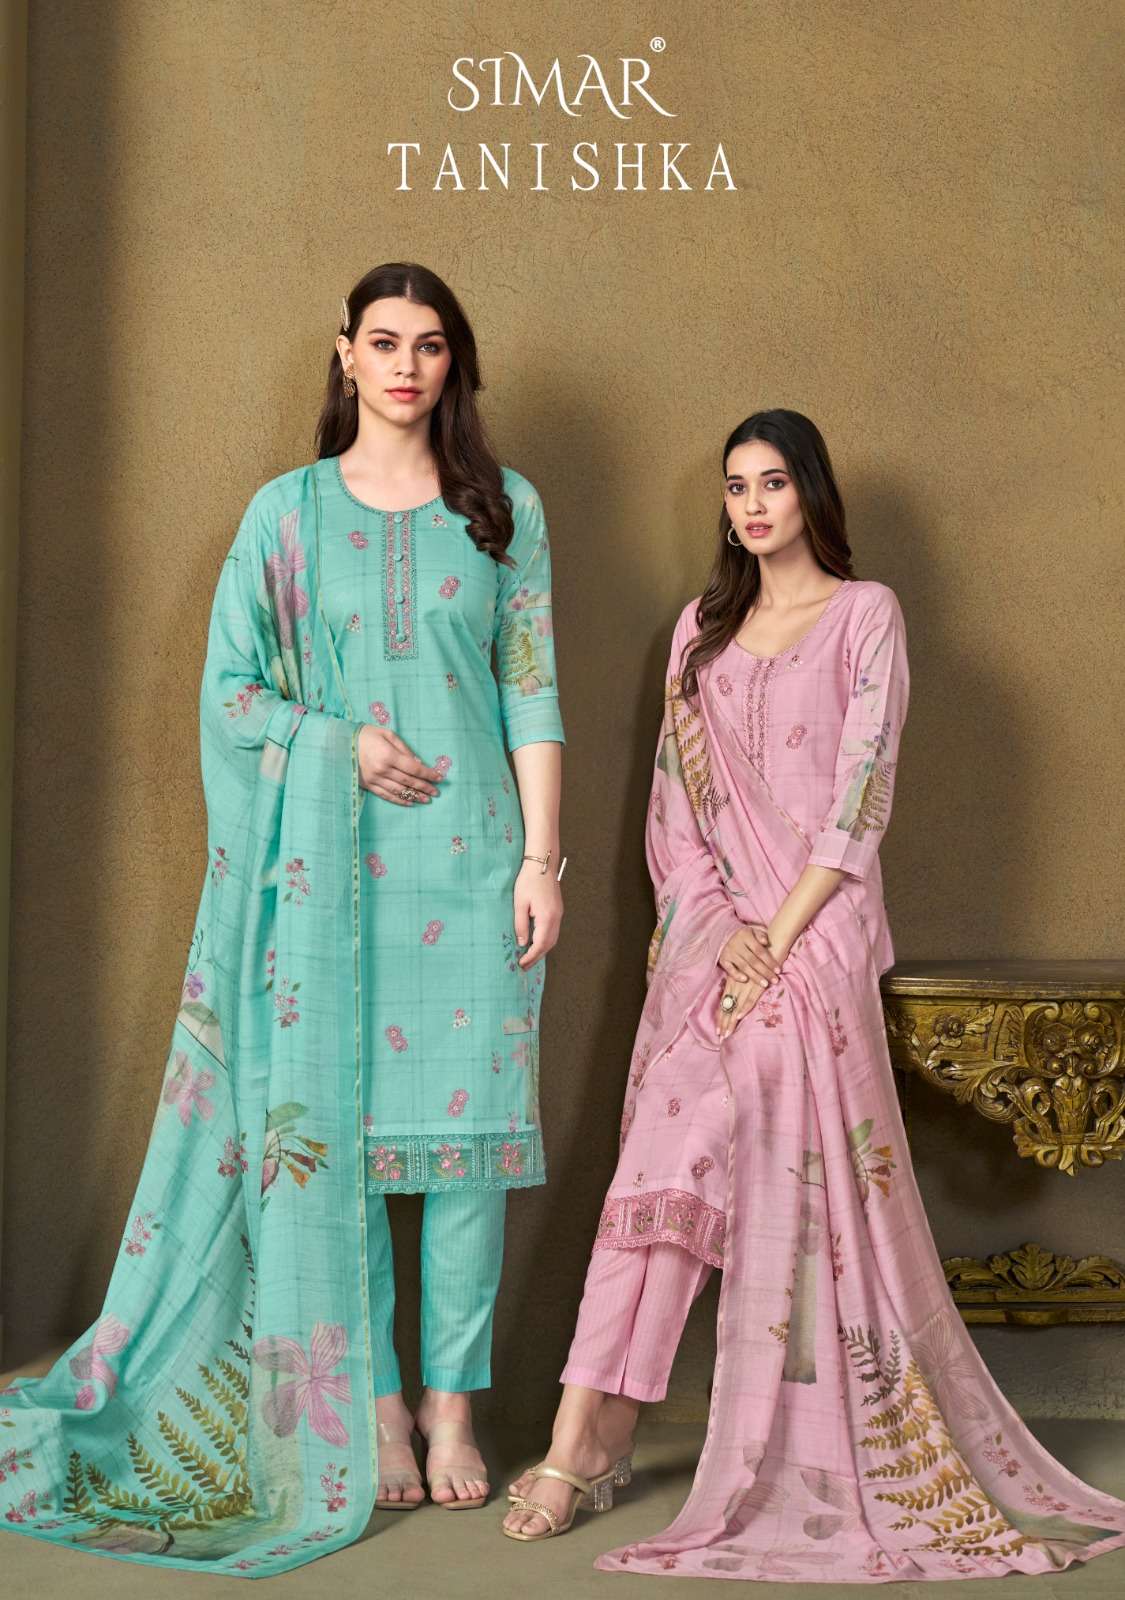 Glossy Simar Tanishka Pure Lawn Cotton Fancy Suit Catalog Exporters